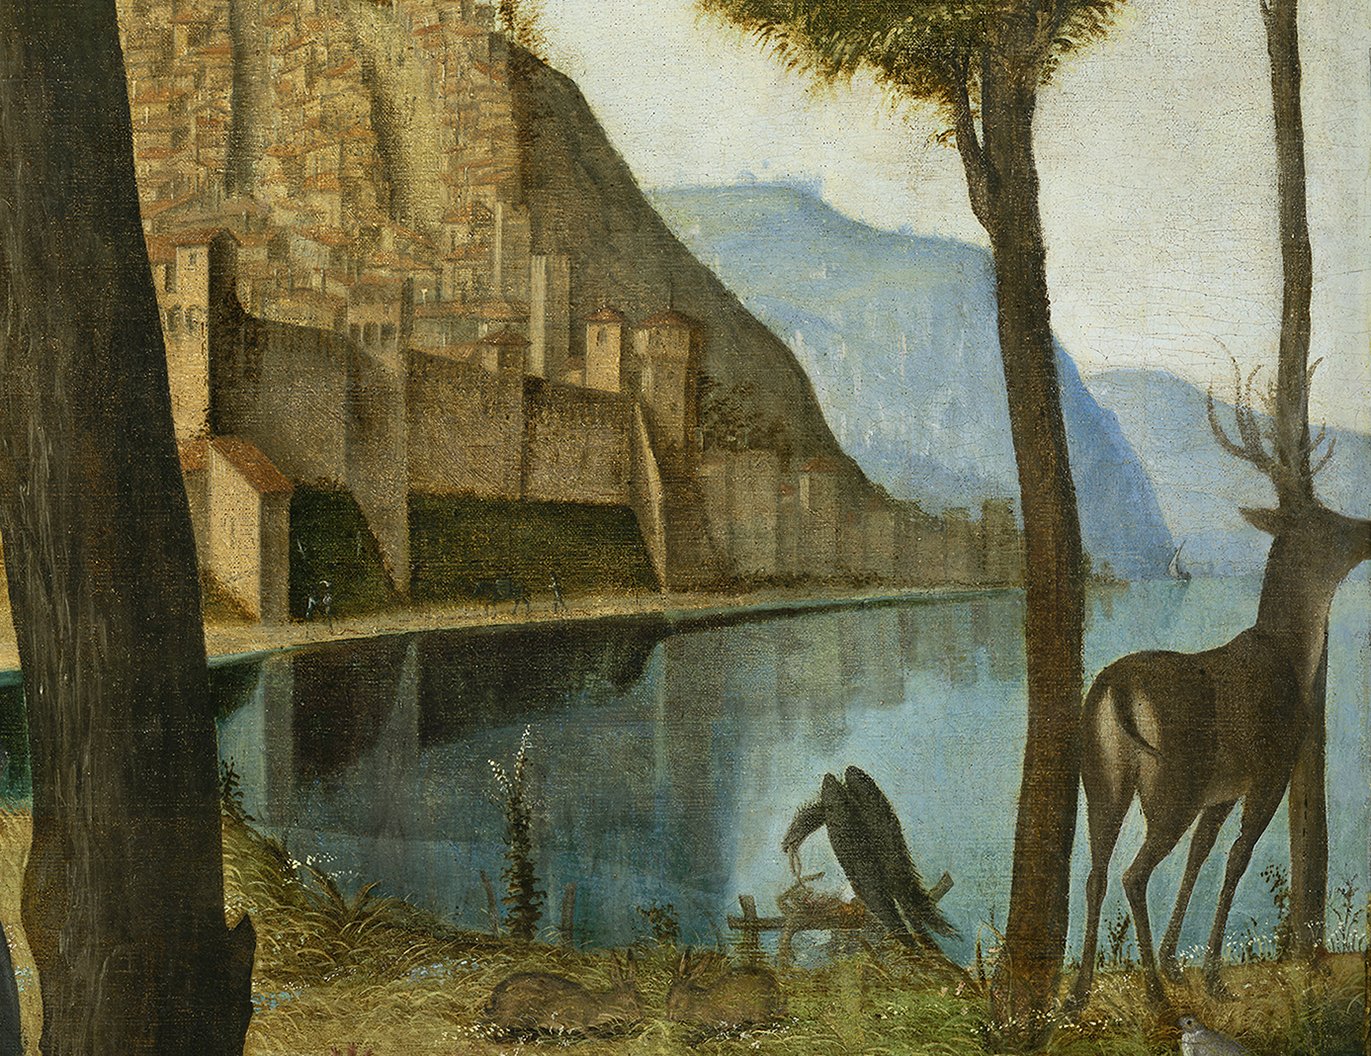 Detail of Carpaccio's painting “Young Knight in a Landscape”